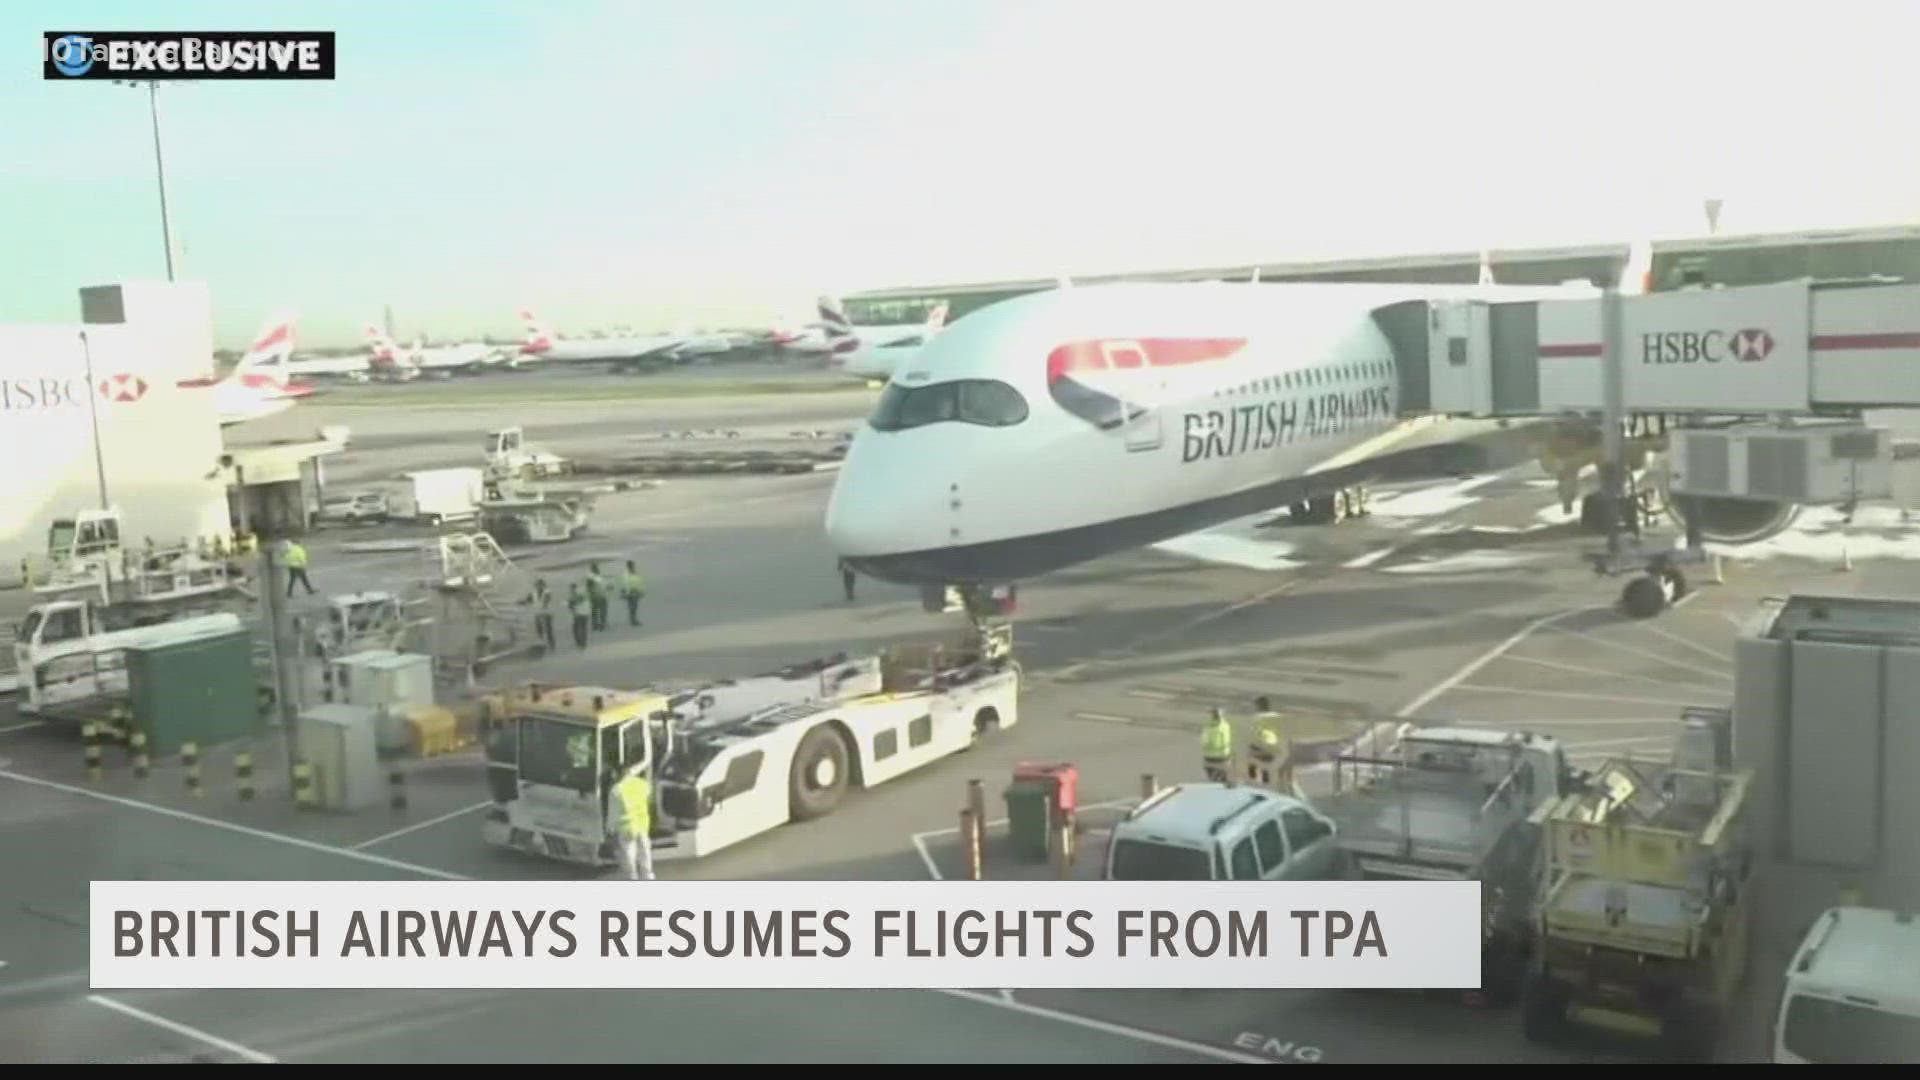 British Airways returned with flight service to London Gatwick, the first European service since March 2020.